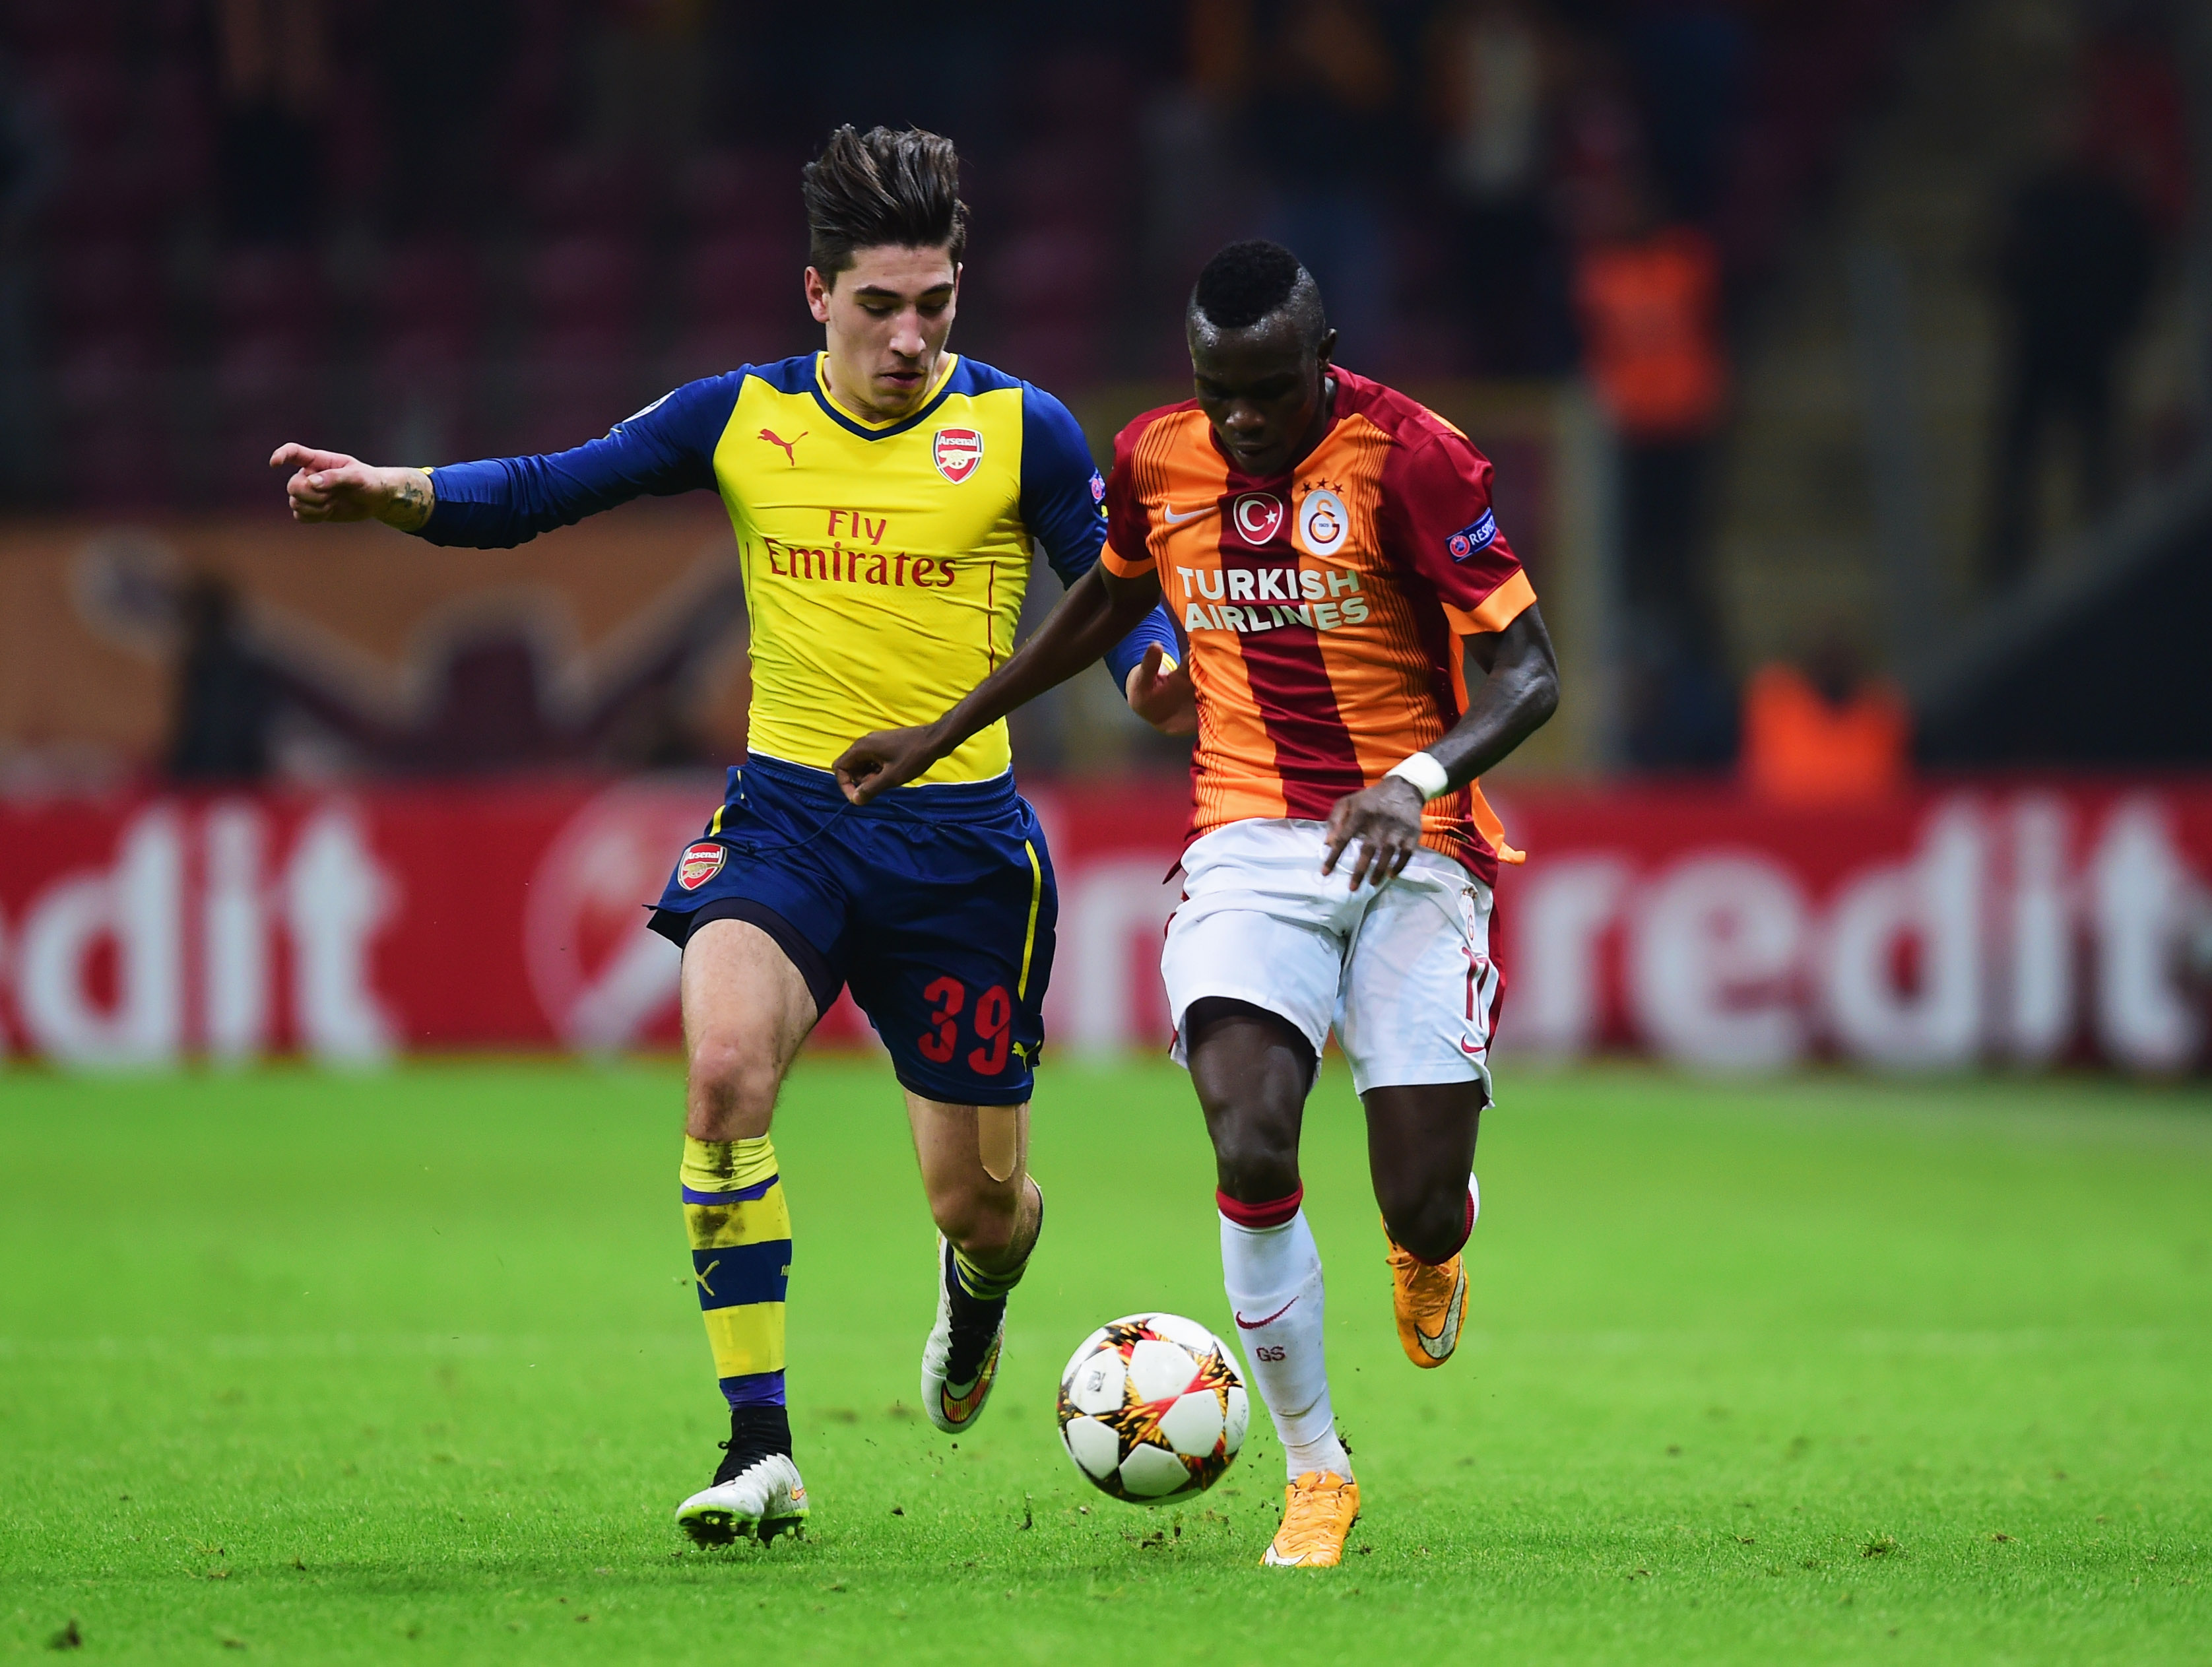 ISTANBUL, TURKEY - DECEMBER 09:  Hector Bellerin of Arsenal chases the ball with Bruma of Galatasaray during the UEFA Champions League Group D match between Galatasaray AS and Arsenal FC at Ali Sami Yen Arena on December 9, 2014 in Istanbul, Turkey.  (Photo by Jamie McDonald/Getty Images)